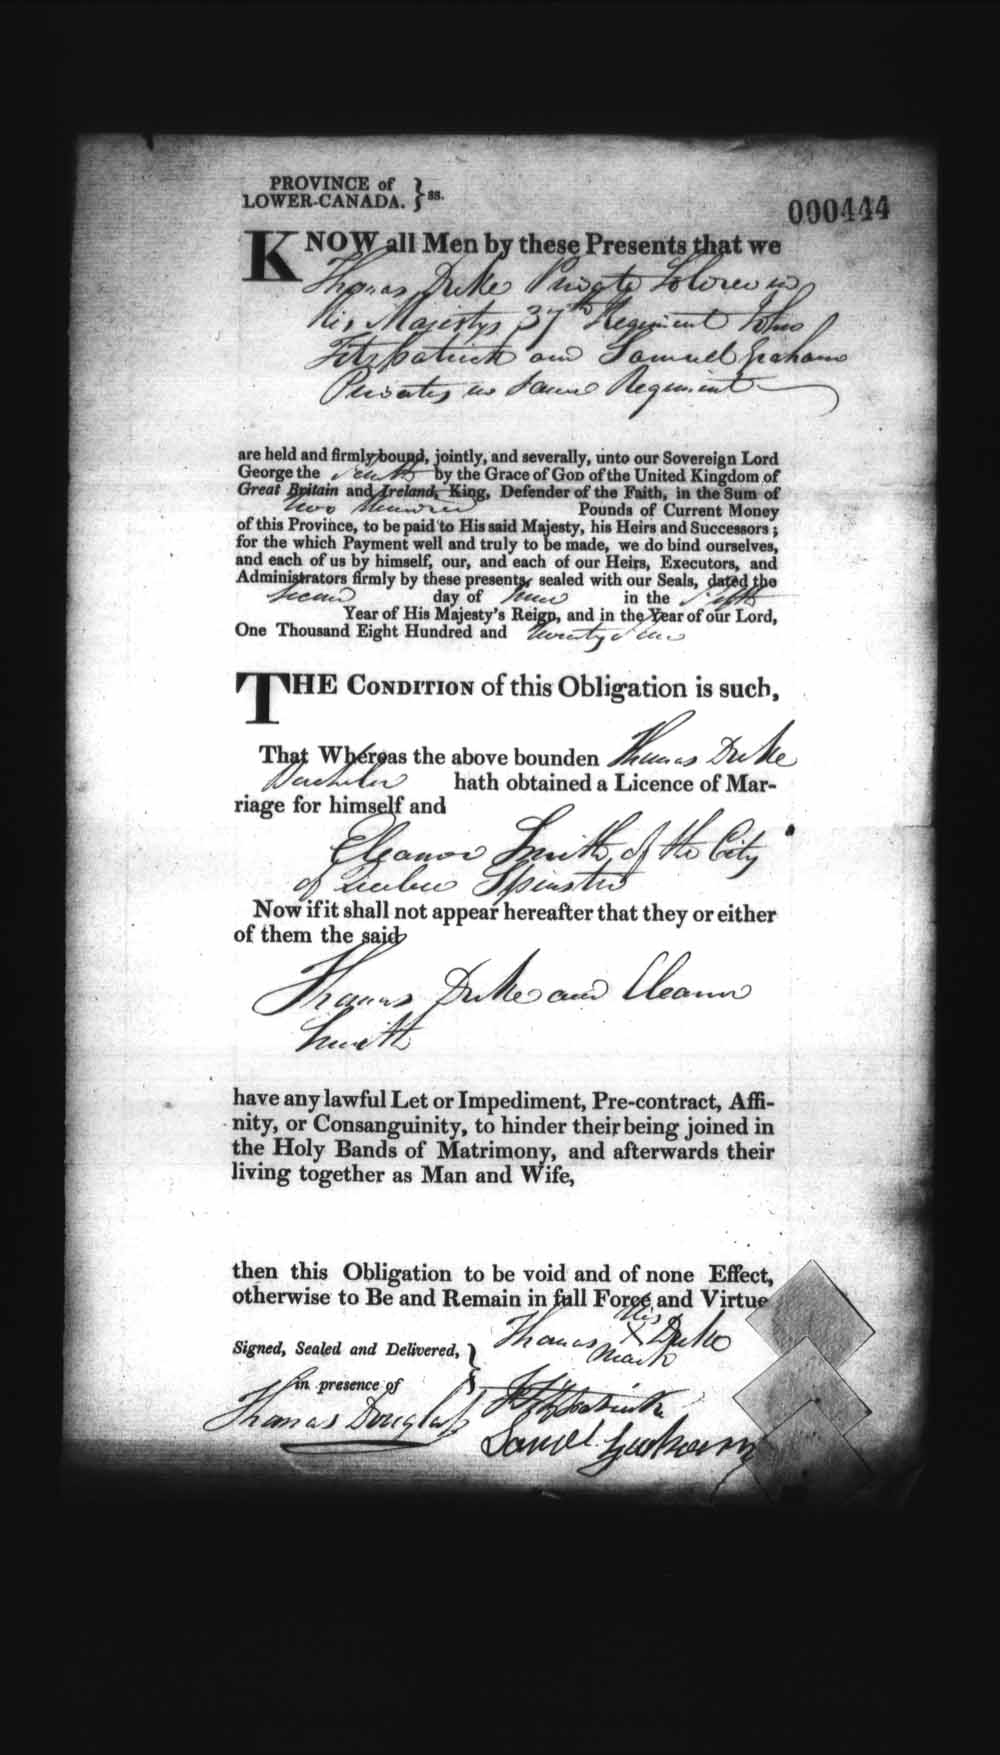 Digitized page of Upper and Lower Canada Marriage Bonds (1779-1865) for Image No.: e008236349